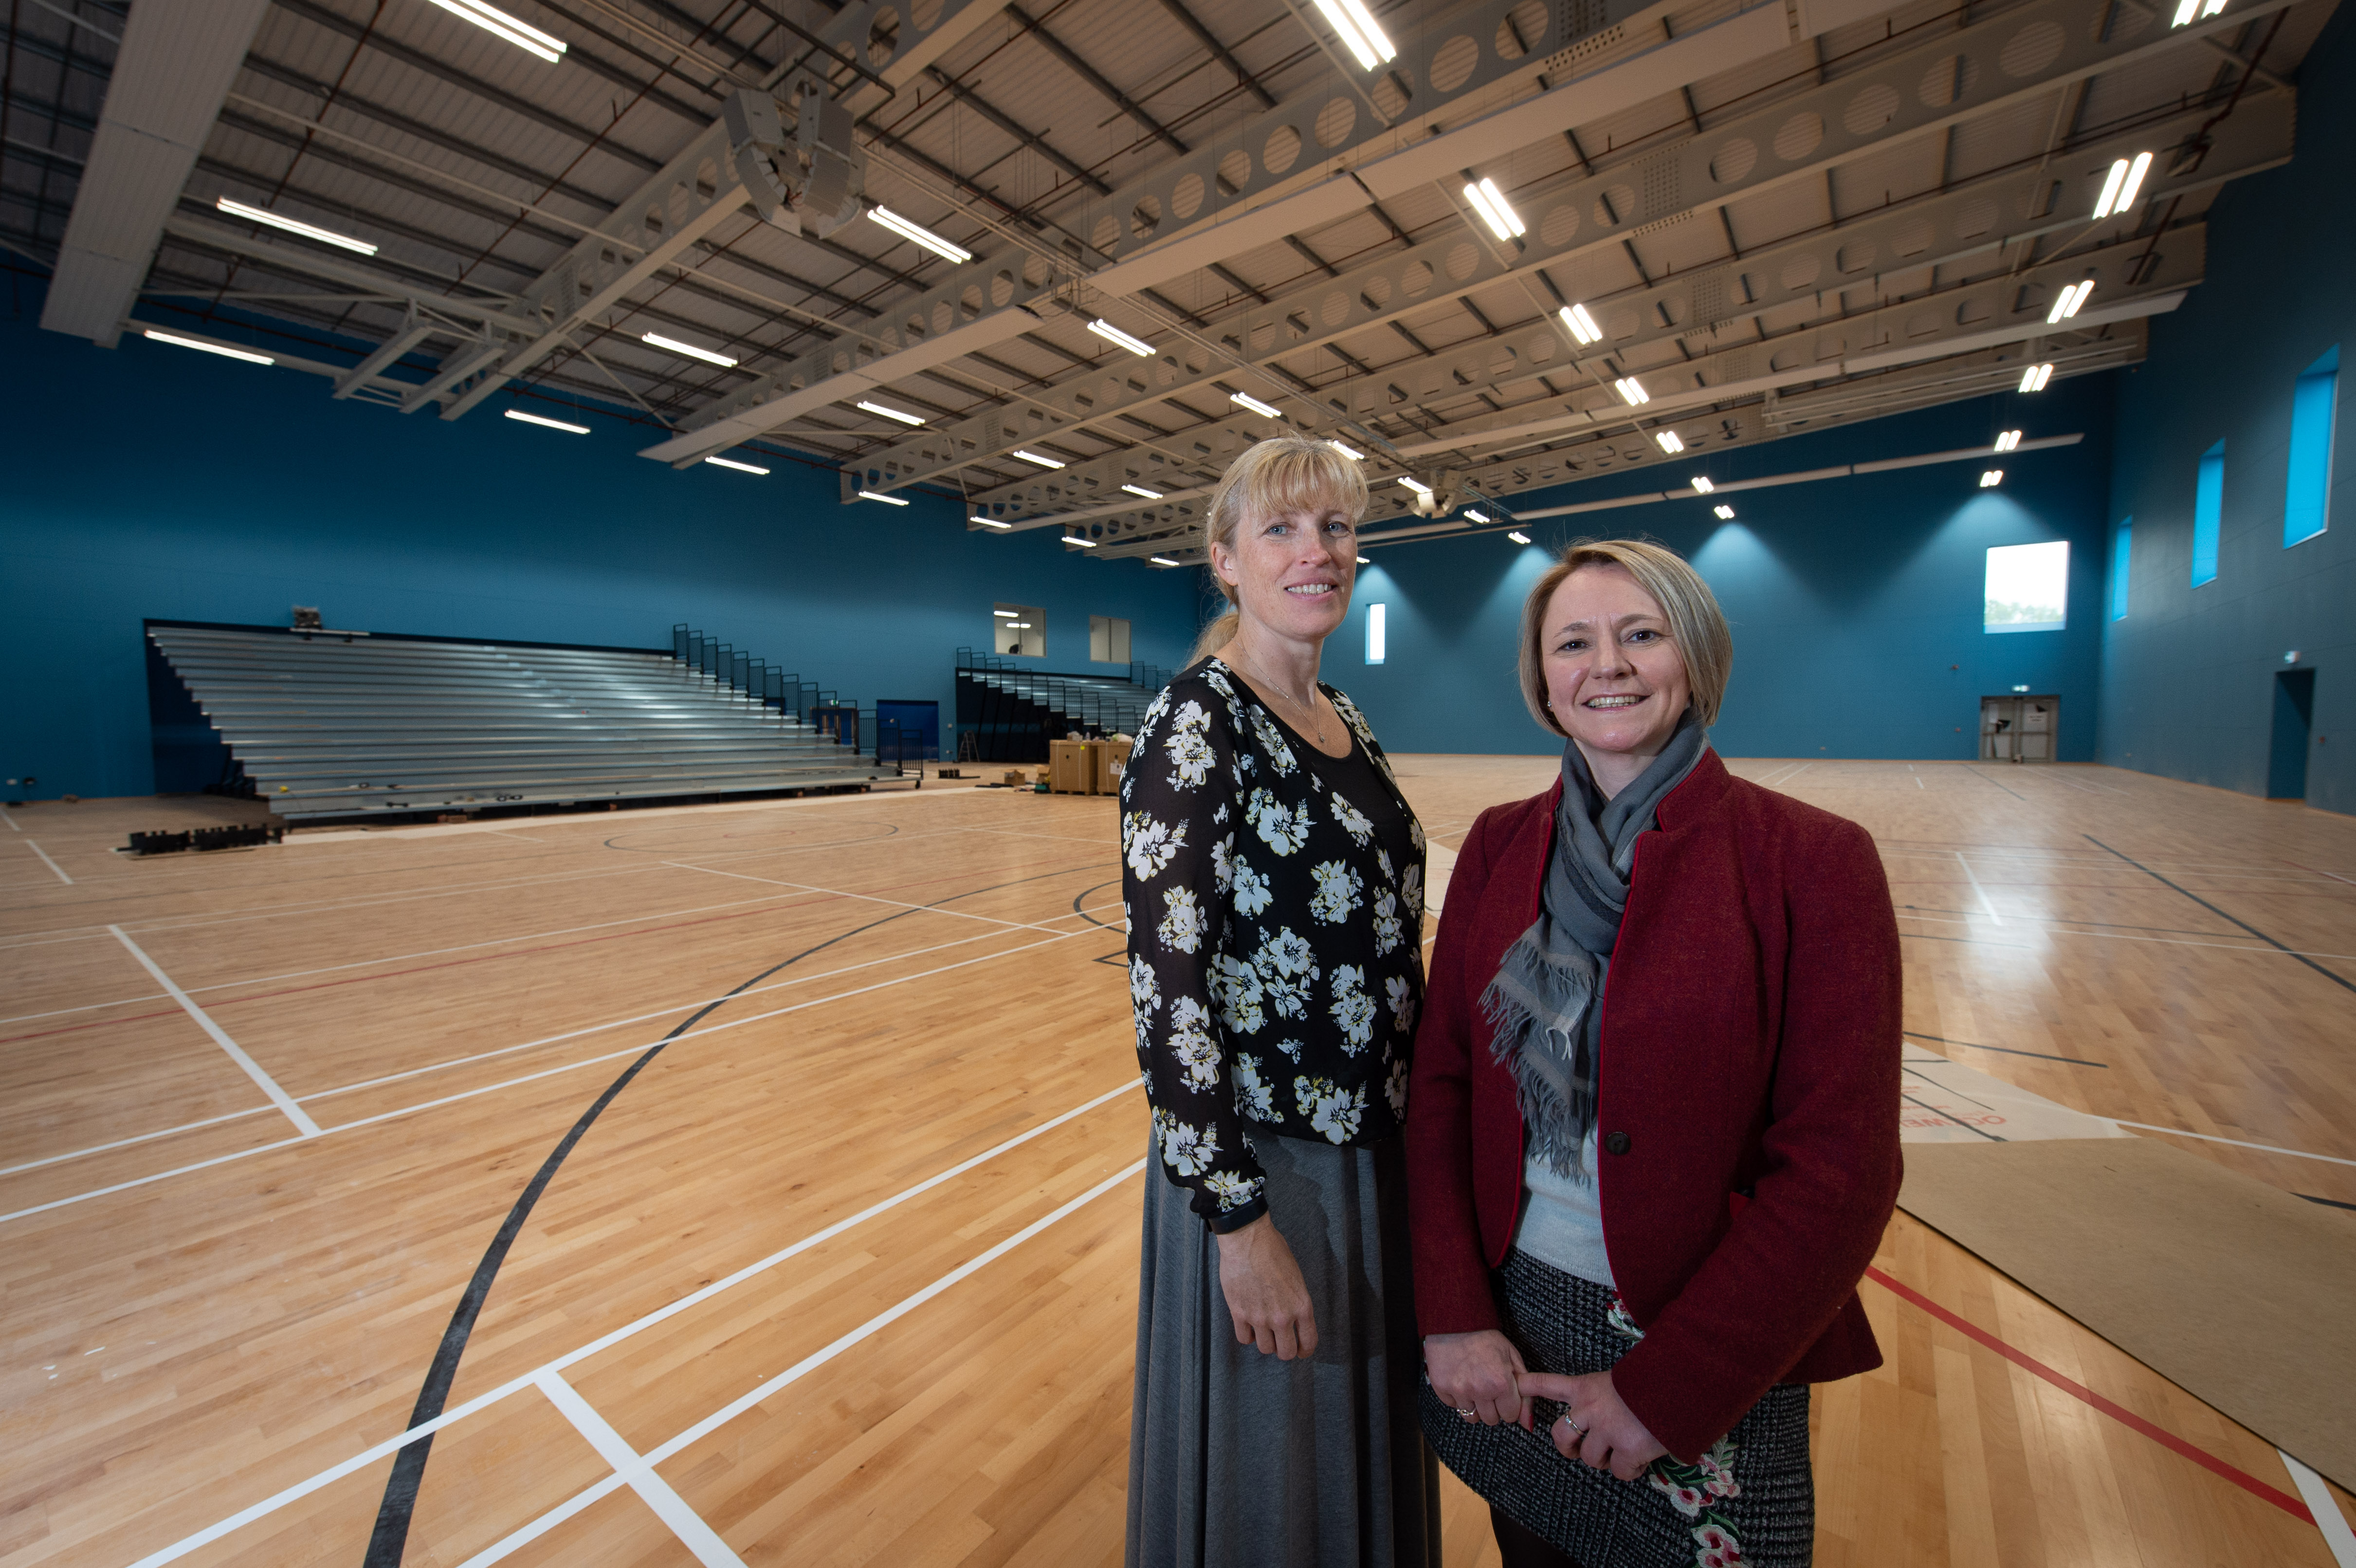 Picture: L2R - Kathryn Evans (Chief Executive) and Gail Cleaver (Operations Manager) pictured in the Sports Hall. Pictures and video by Jason Hedges